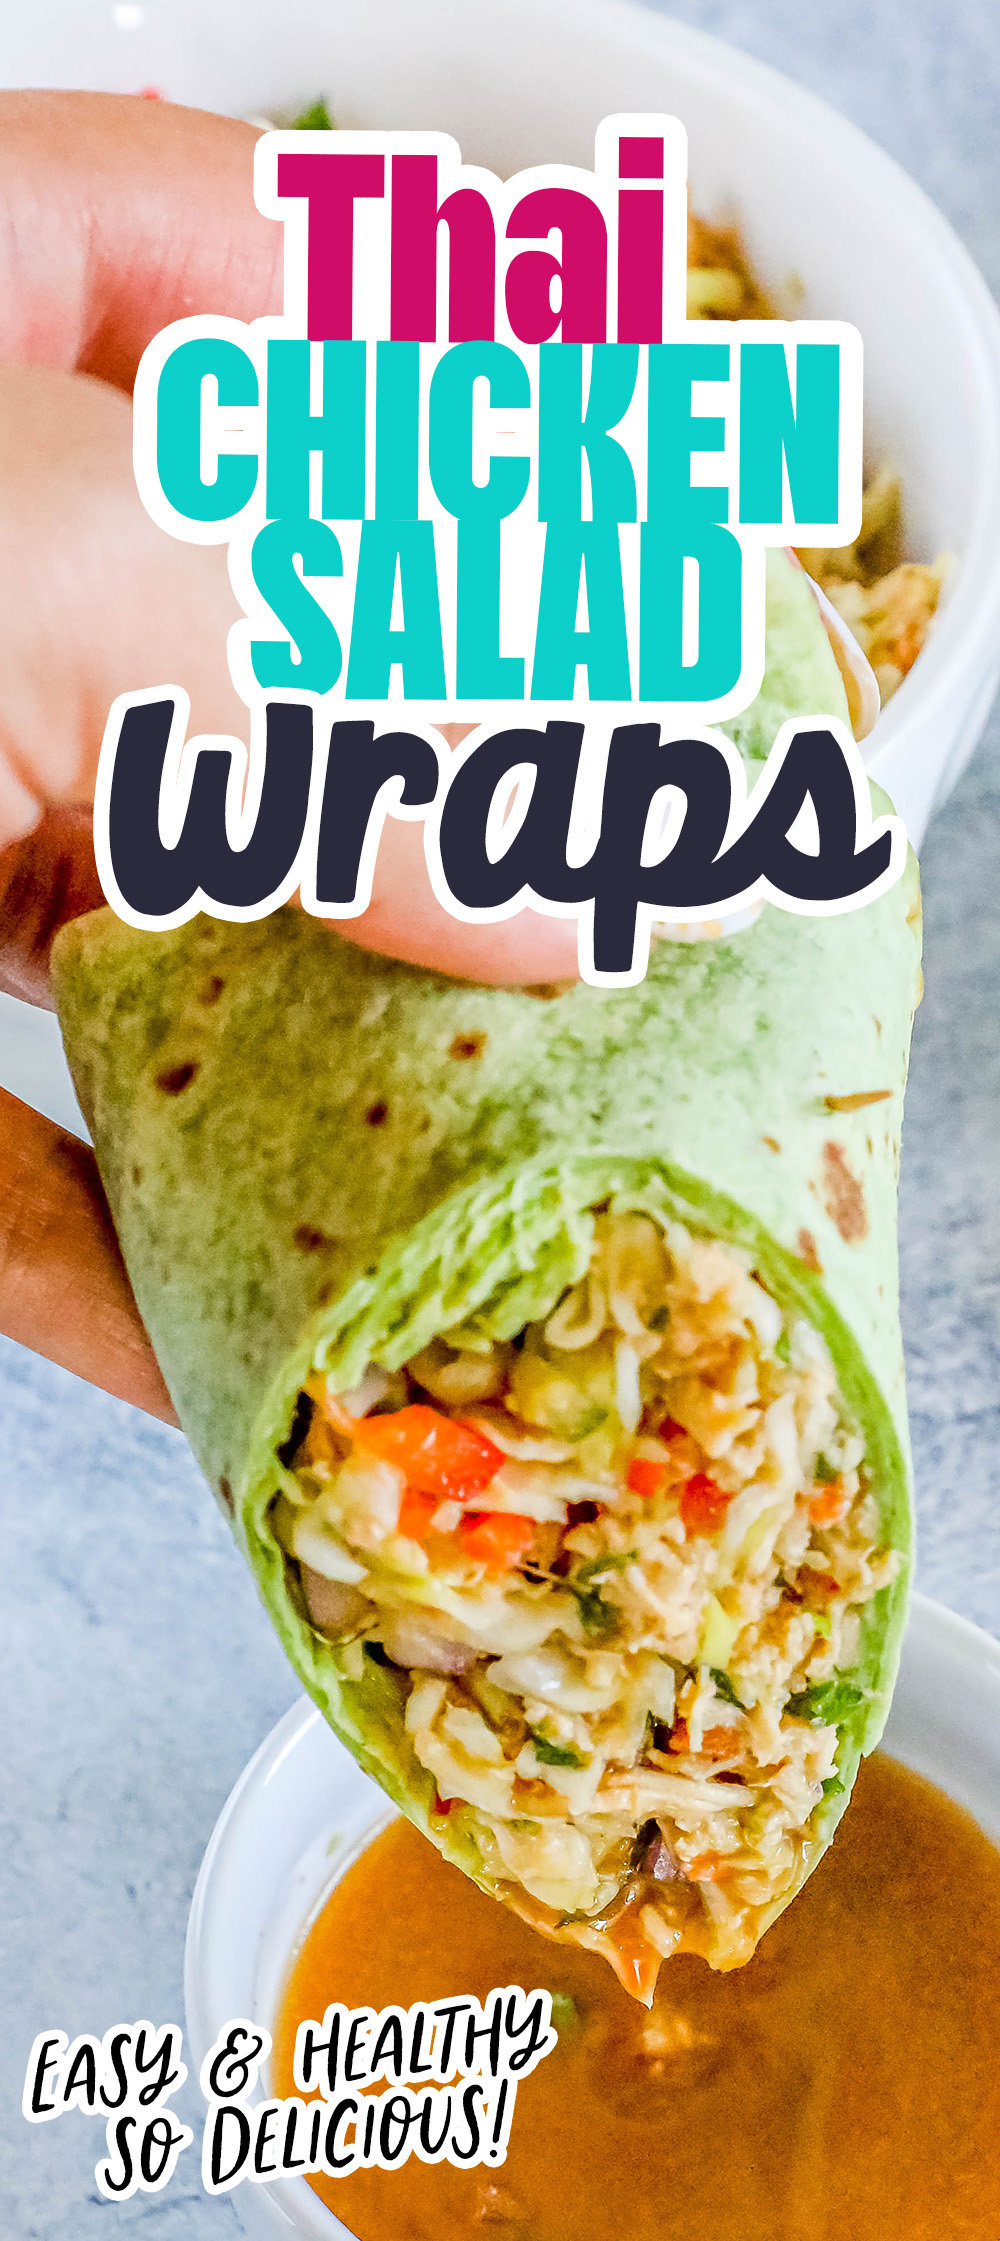 chicken salad with shredded chicken, cabbage, and diced vegetables wrapped in a green tortilla sliced in half being dipped into a bowl of peanut sauce